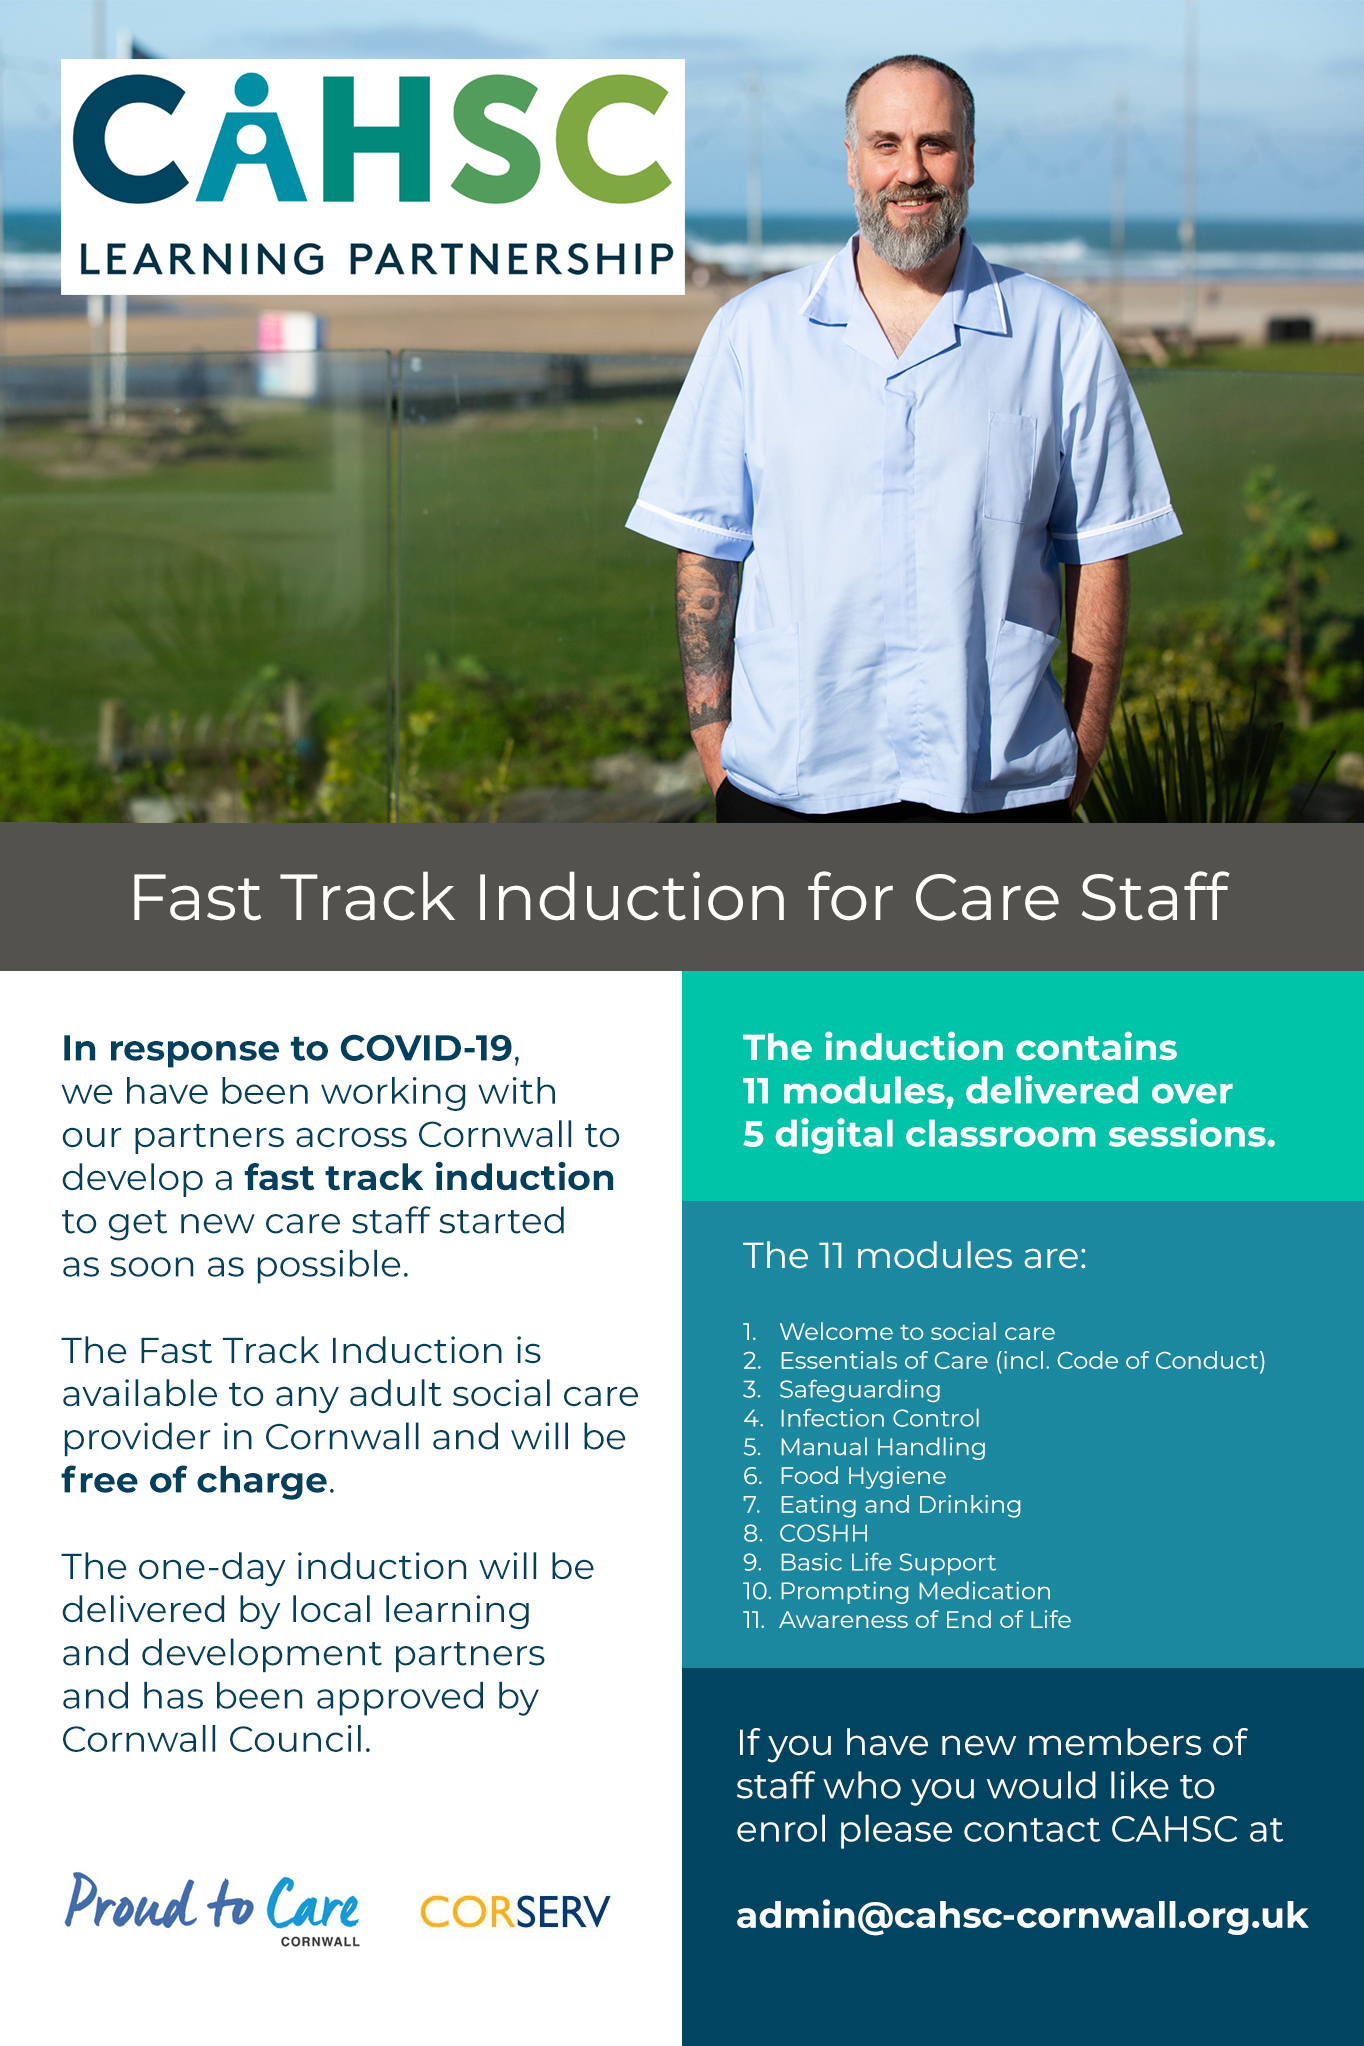 CAHSC fast track induction